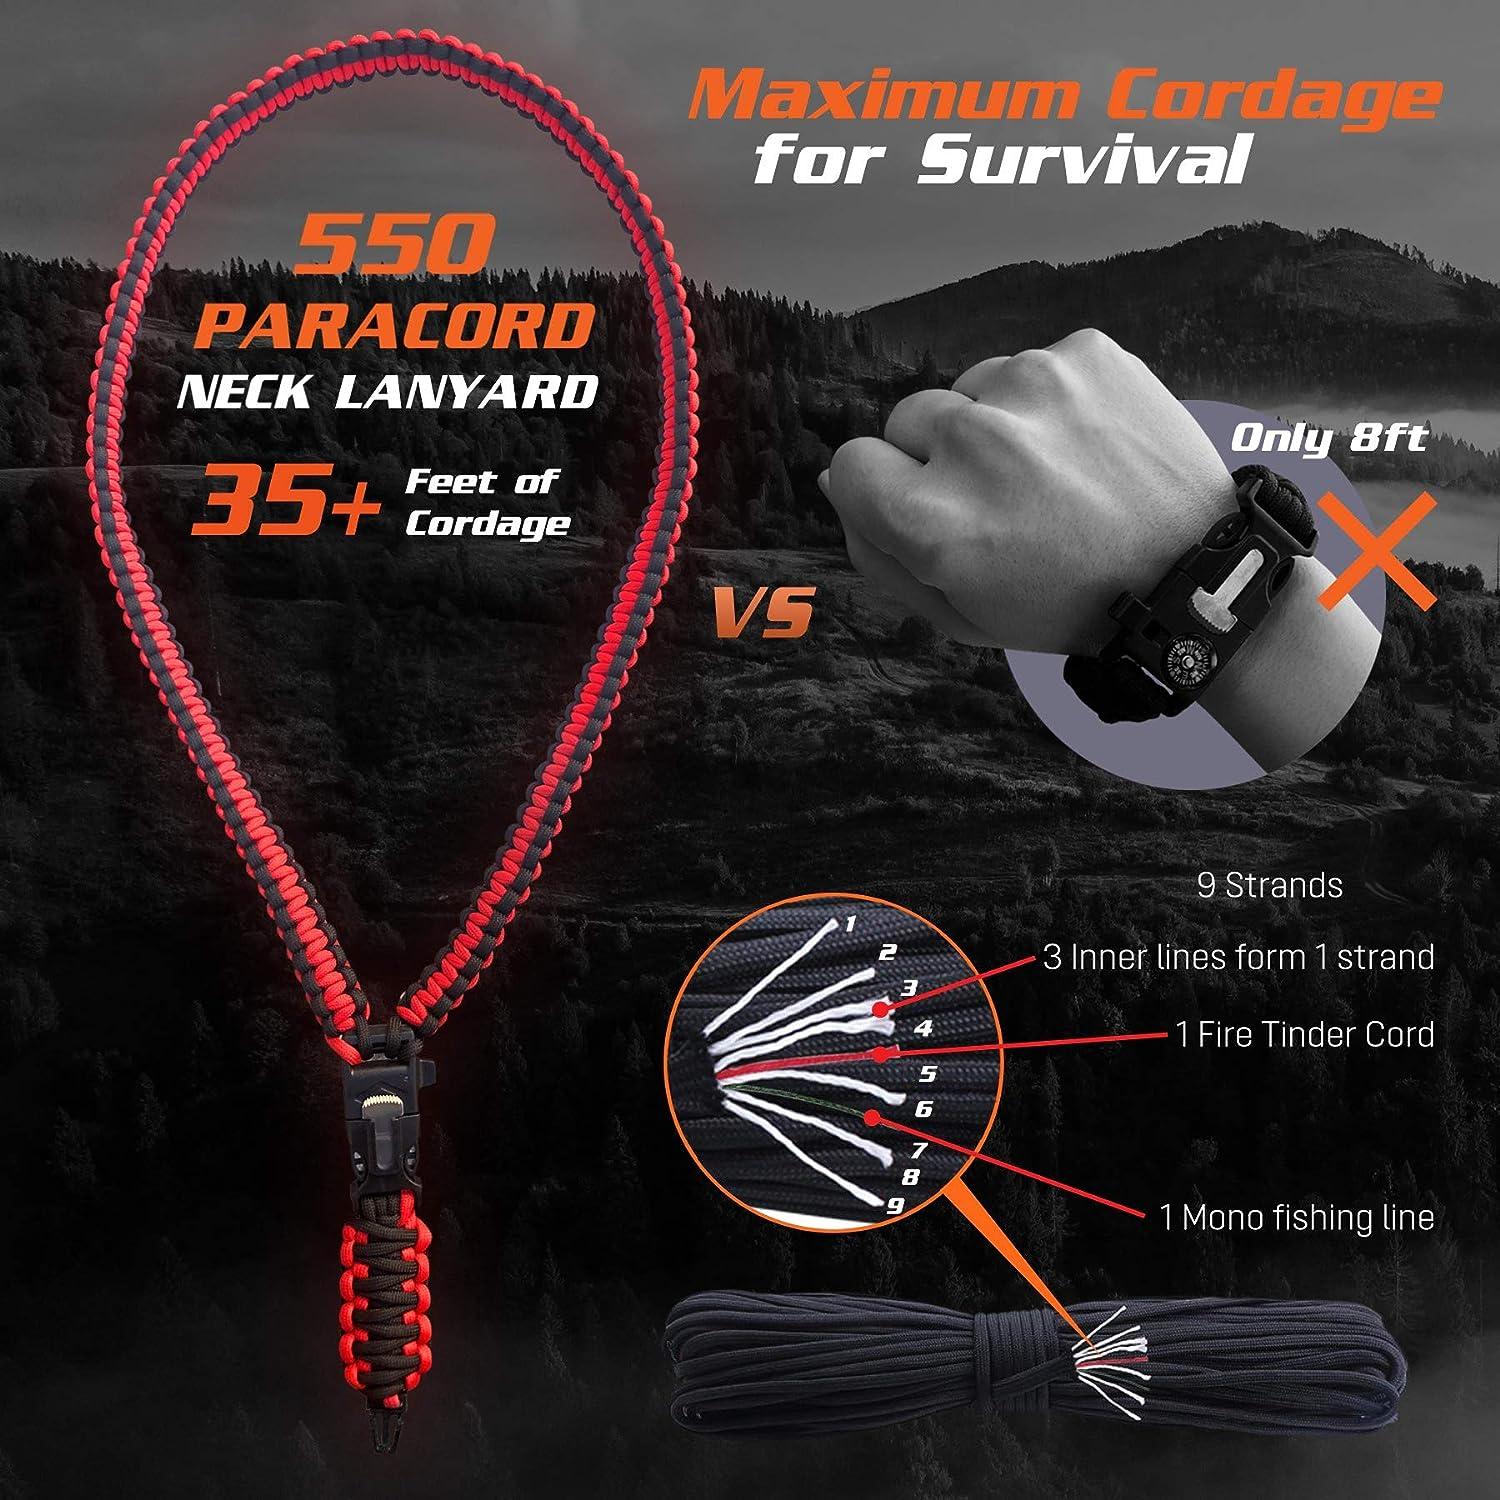 PREPARED4X Hiking Compass Survival Mirror Sighting Map Orienteering Compass  with 35-Ft 550 Survival Paracord Lanyard, Fire Starter, Whistle, Fishing  Line, Tinder Cord